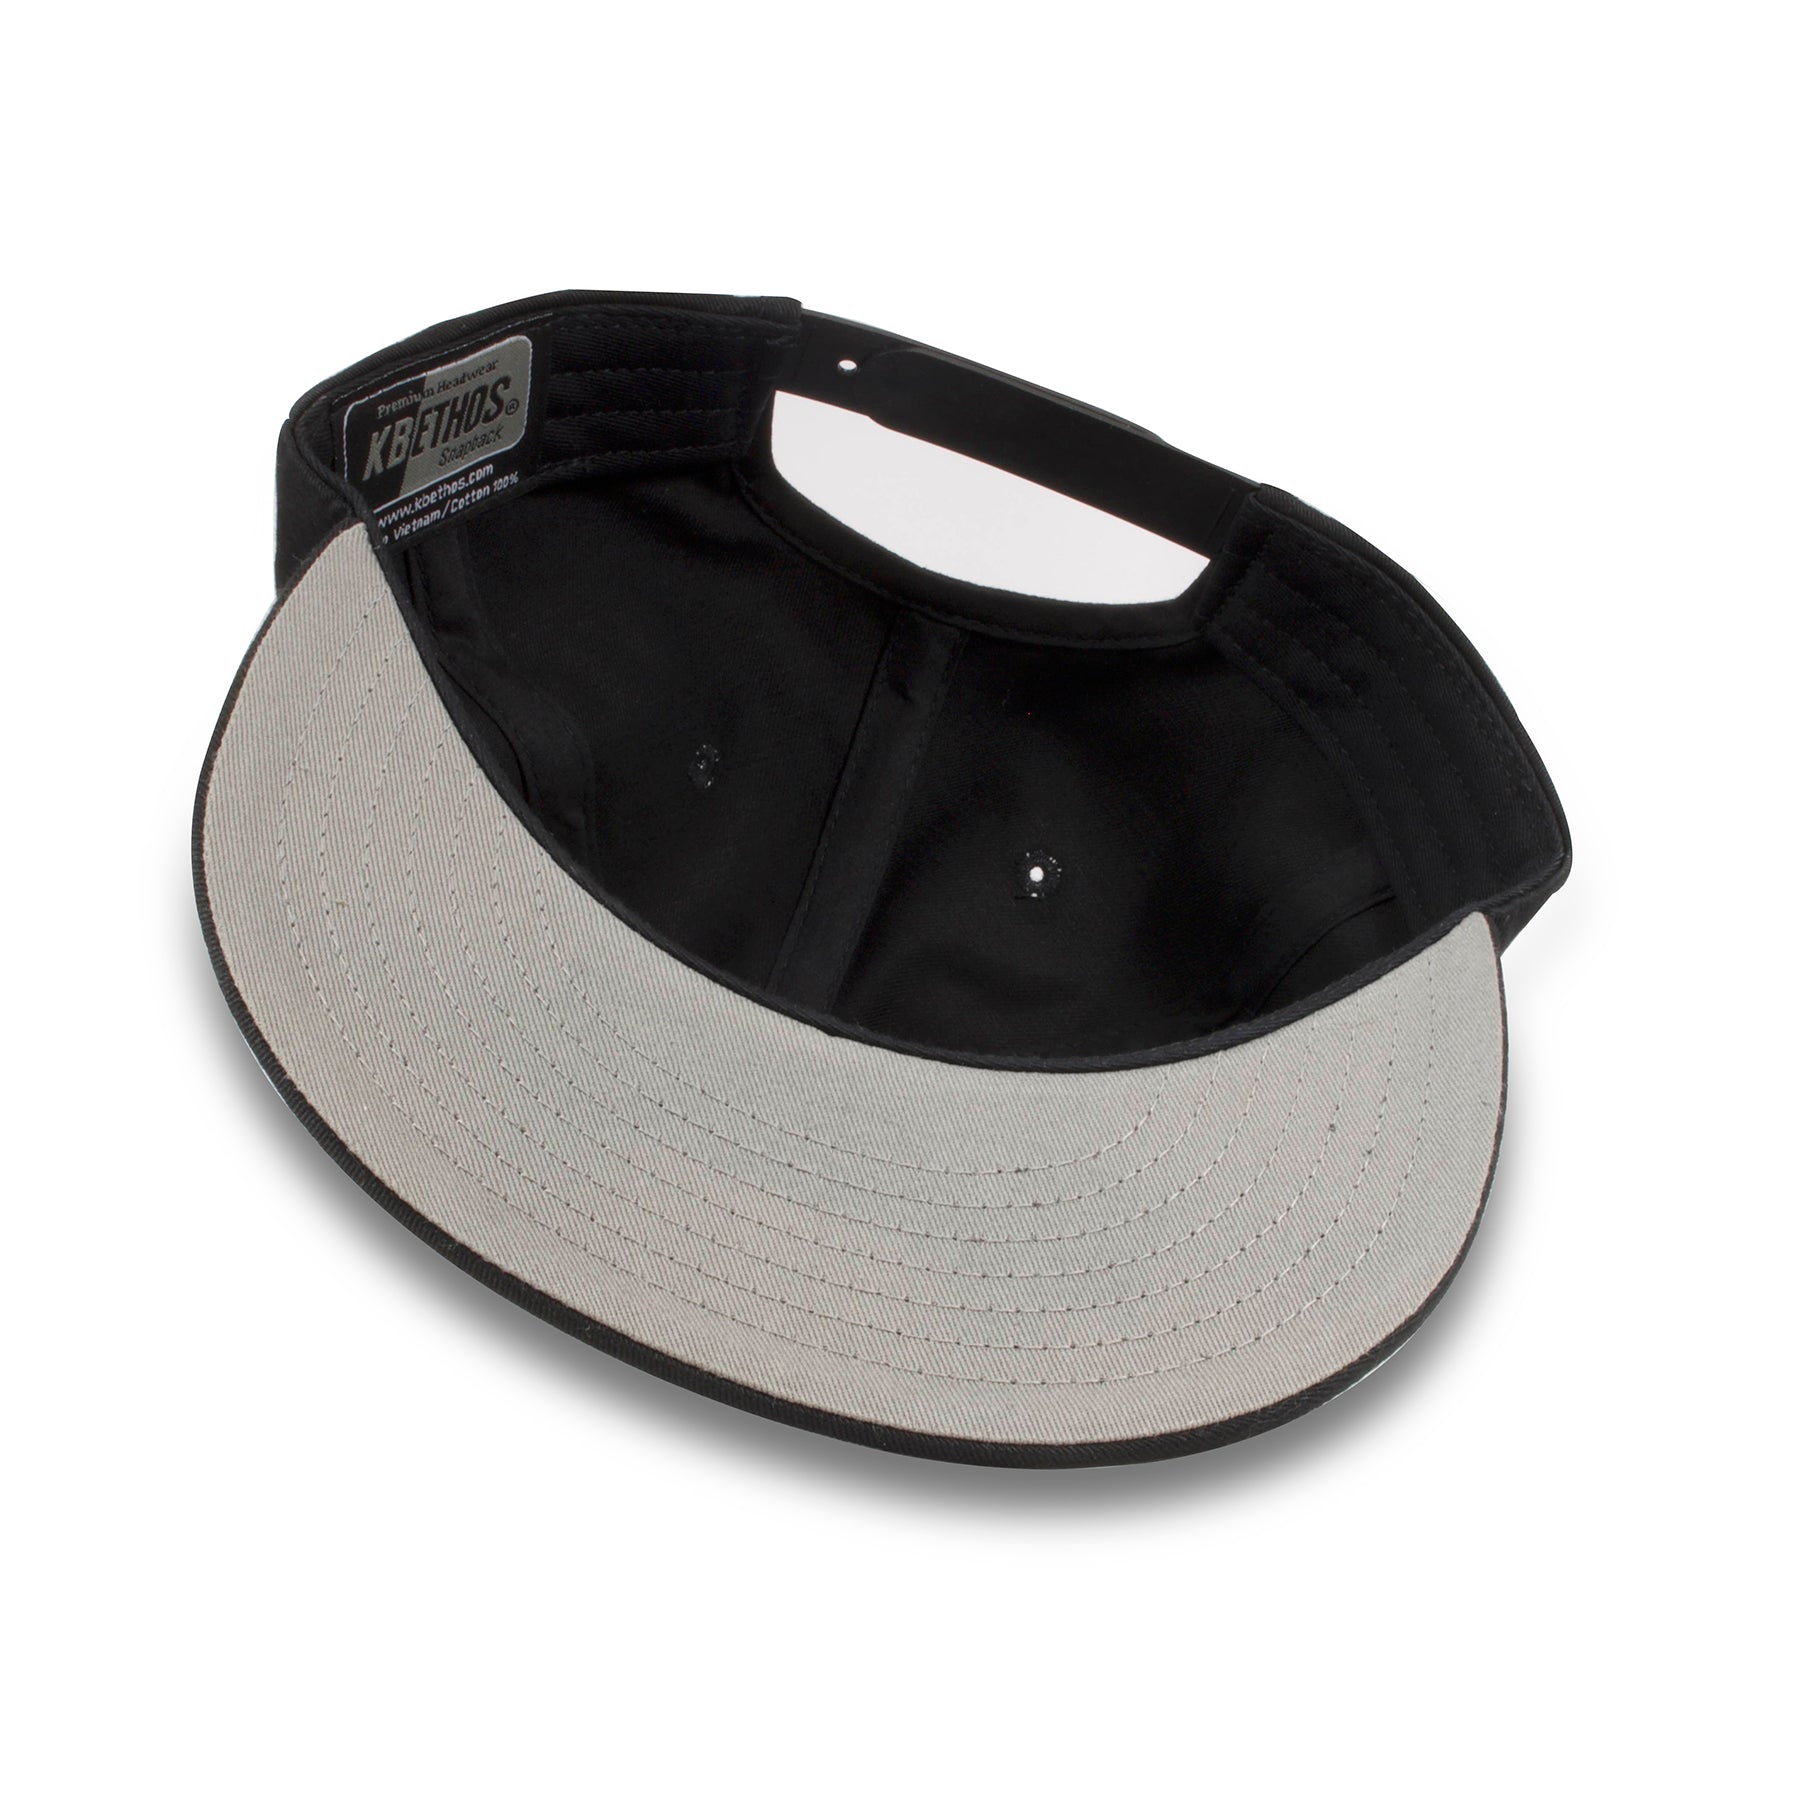 The under brim of the black adjustable blank snapback hat is gray